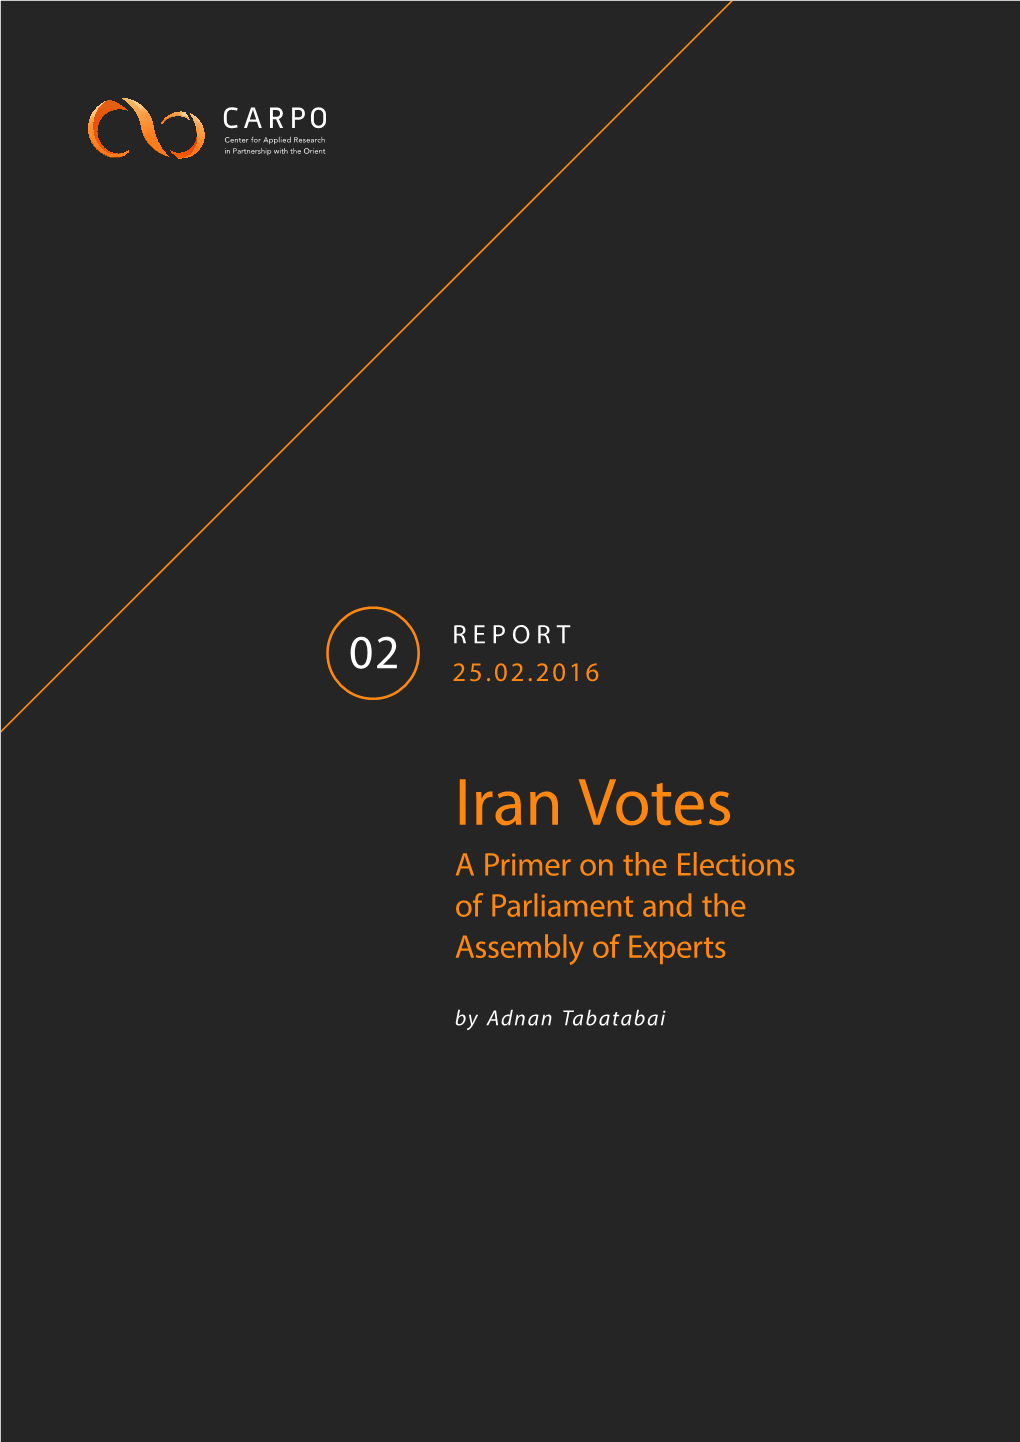 Iran Votes a Primer on the Elections of Parliament and the Assembly of Experts by Adnan Tabatabai REPORT Iran Votes